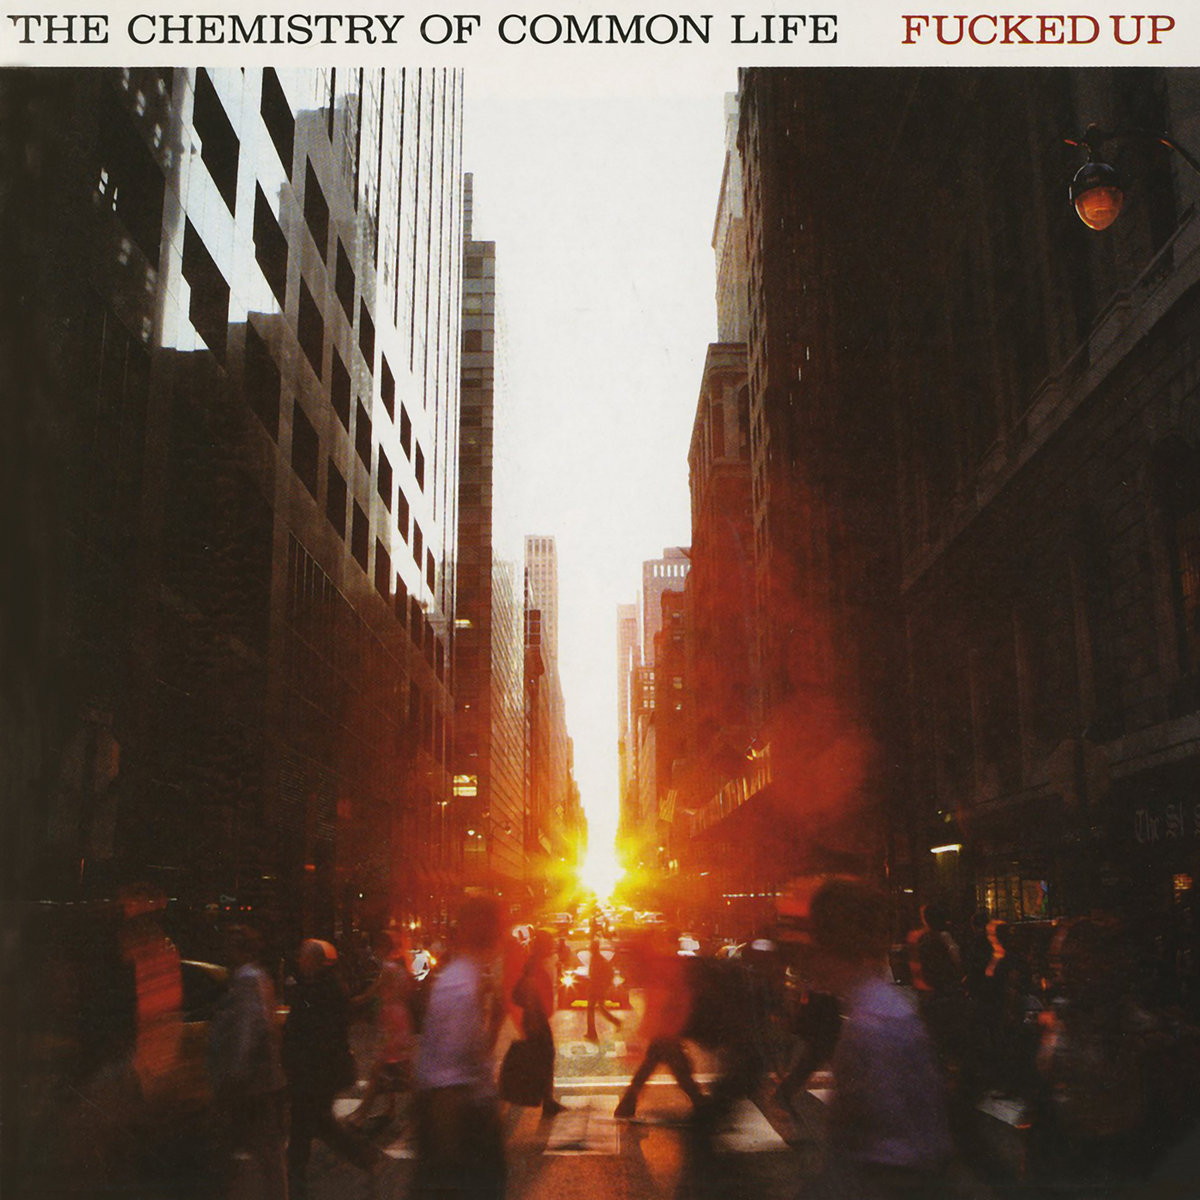 FUCKED UP - THE CHEMISTRY OF COMMON LIFE